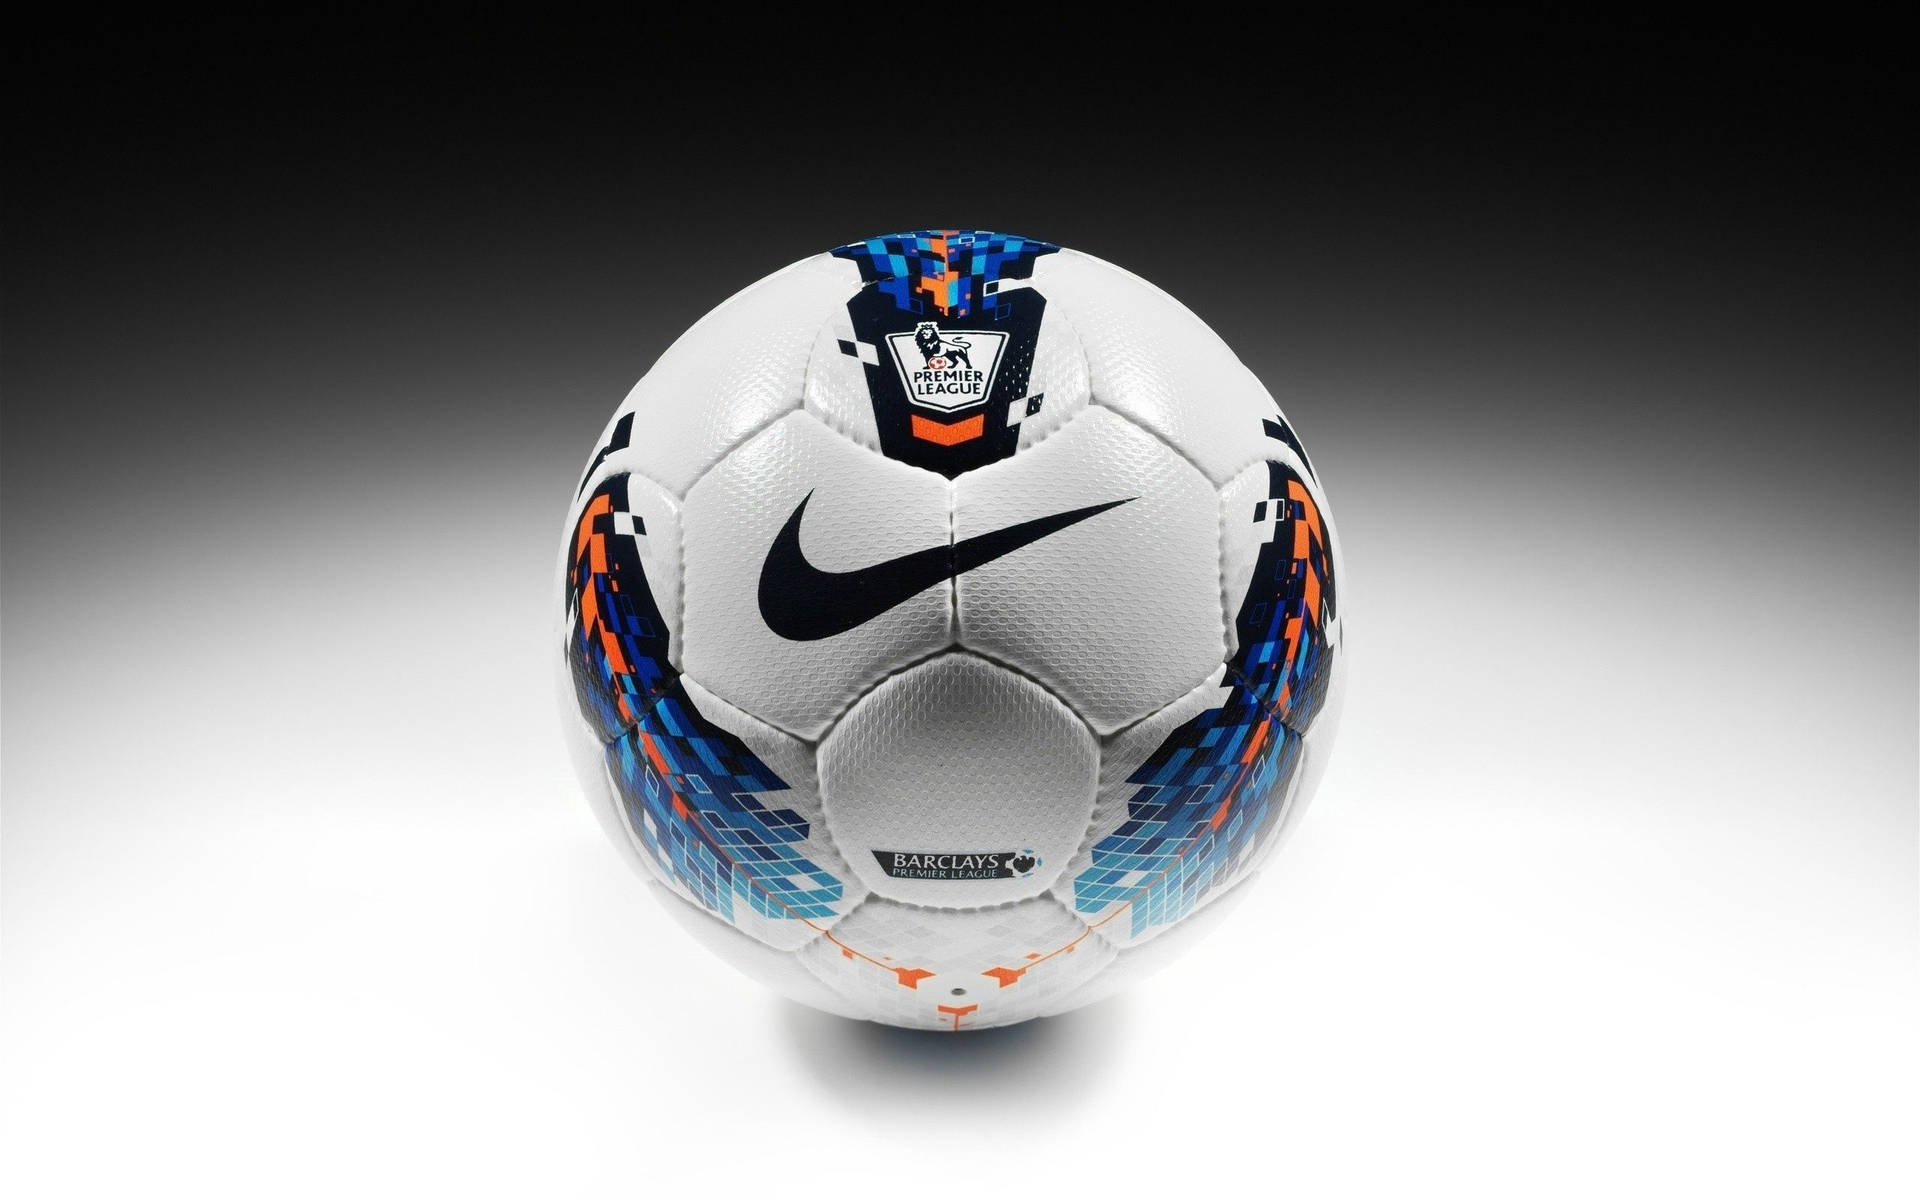 Turn up the heat in the Barclays Premier League, with Nike’s official football. Wallpaper